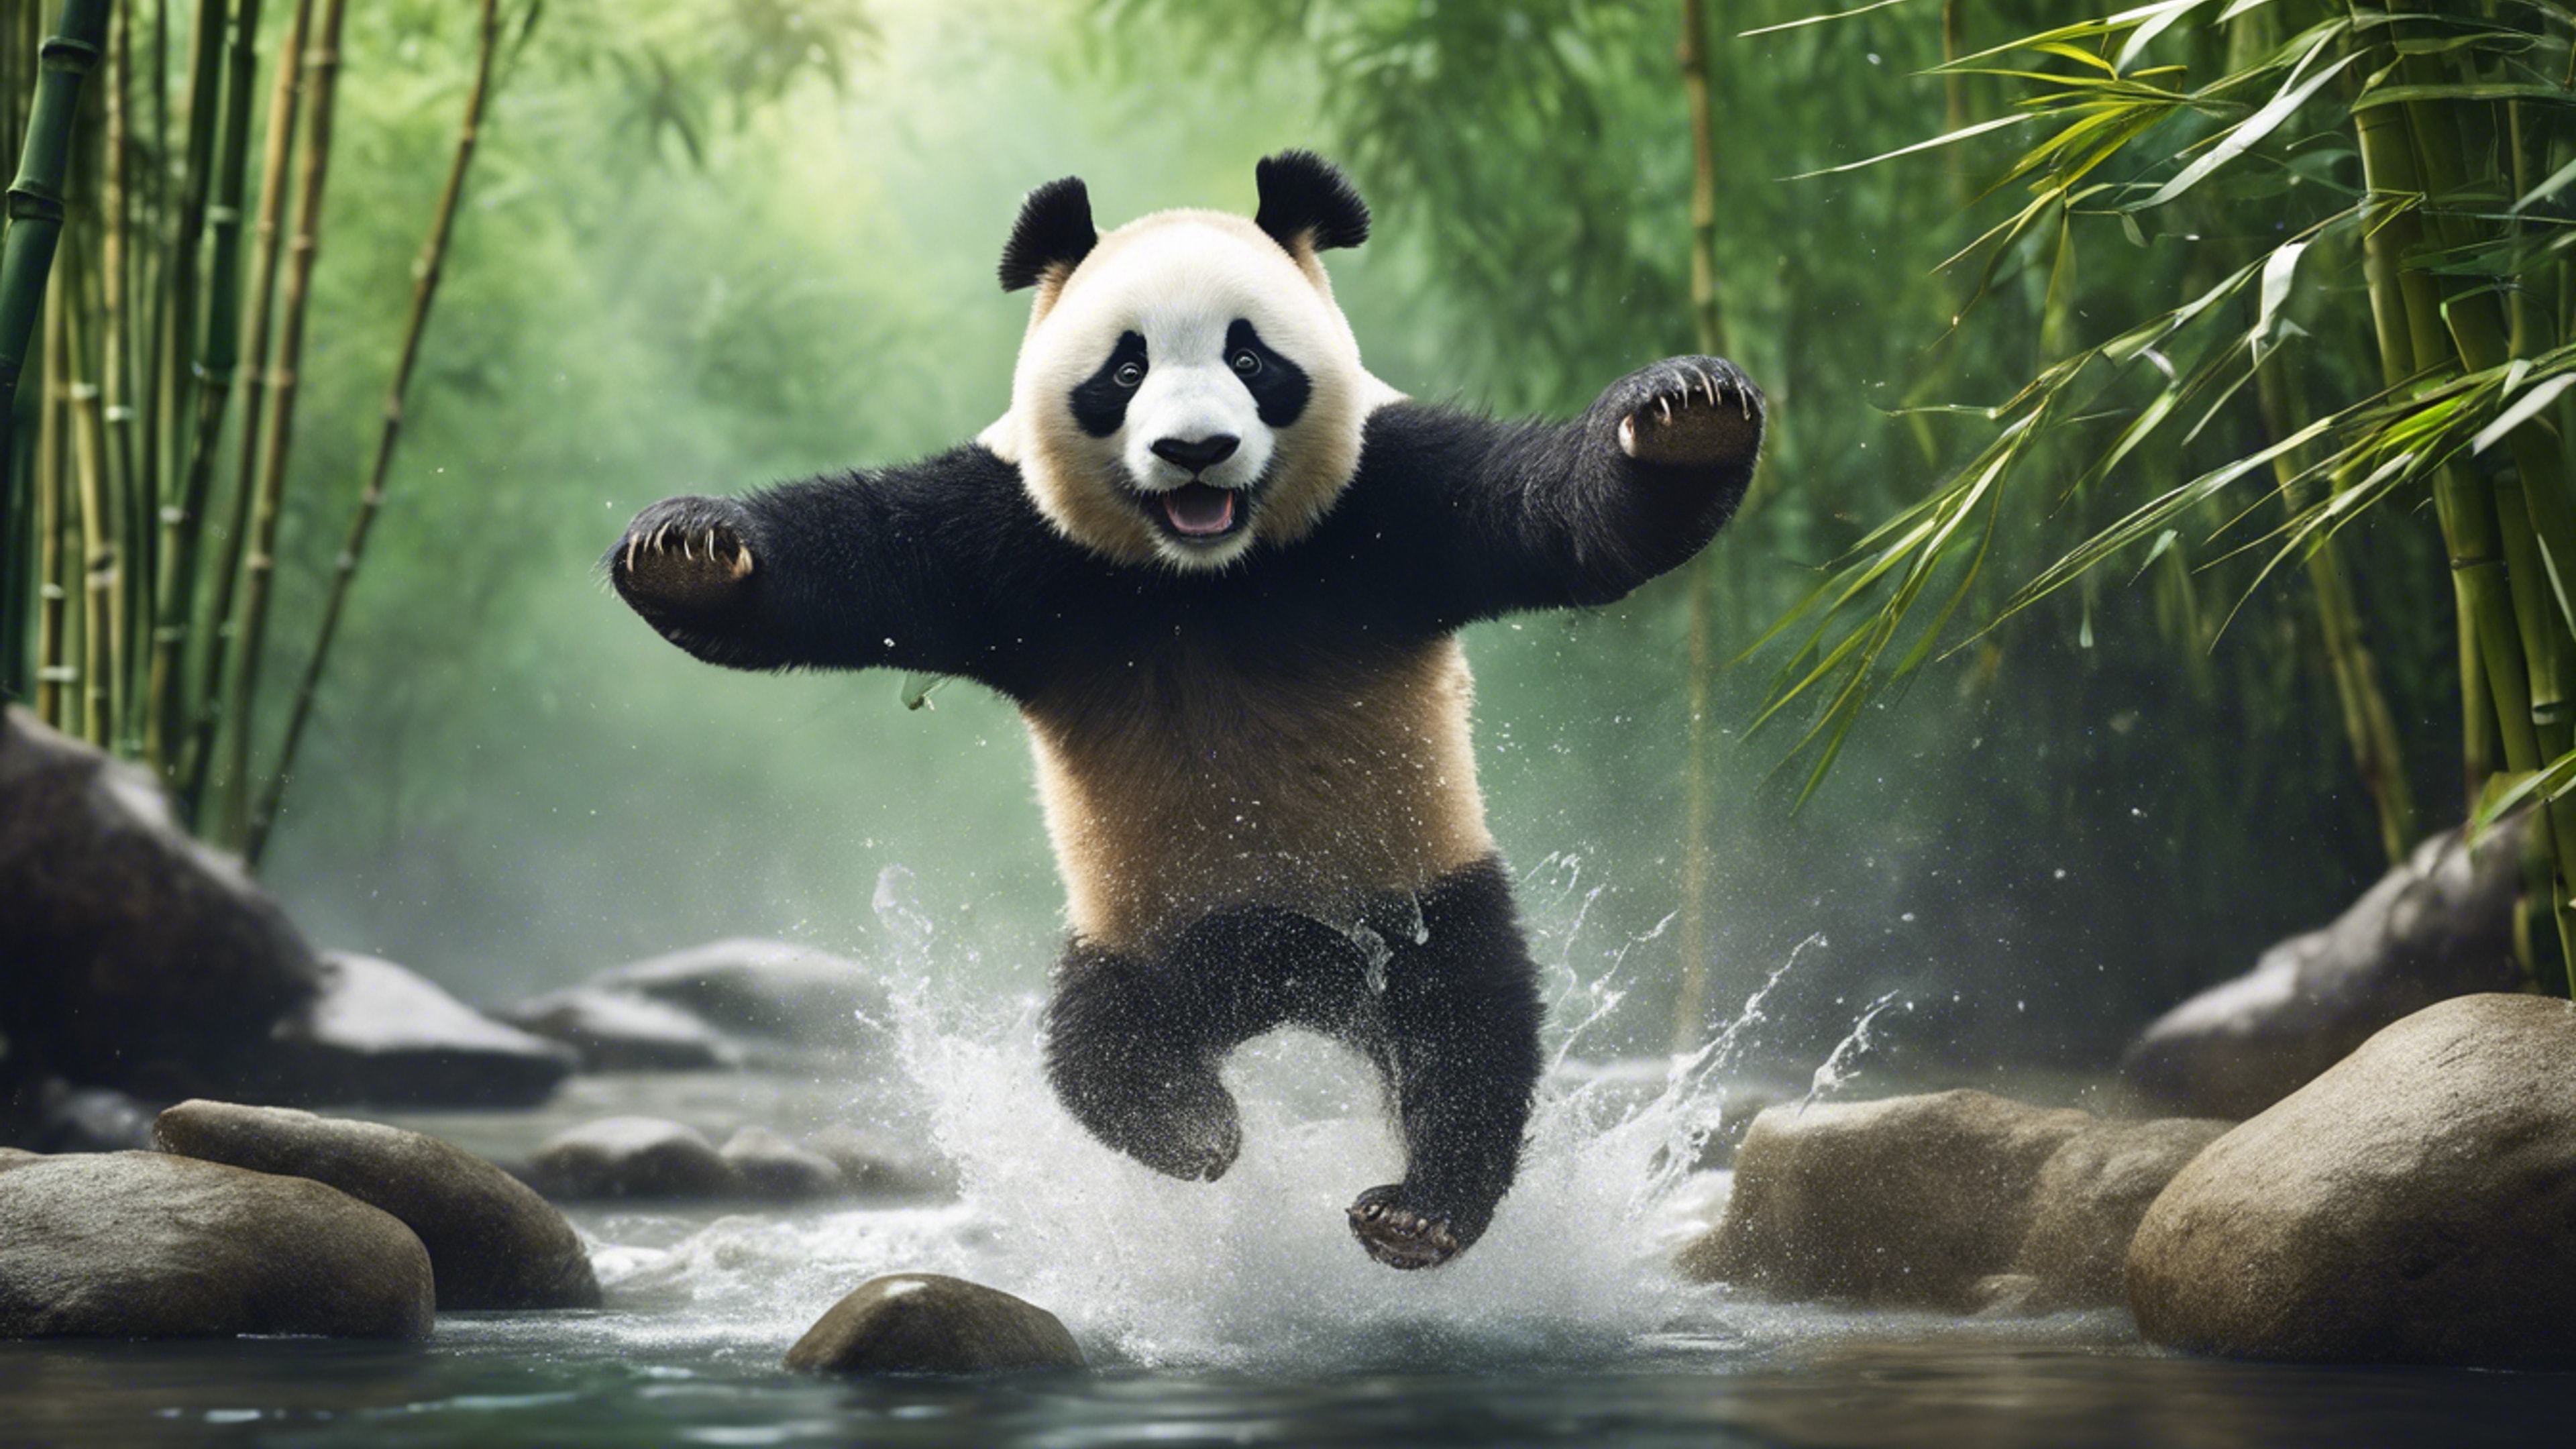 An adventurous panda leaping across a rapid creek with bamboo forests in the backdrop. Tapeet[317eaaa1af264f04a7c3]